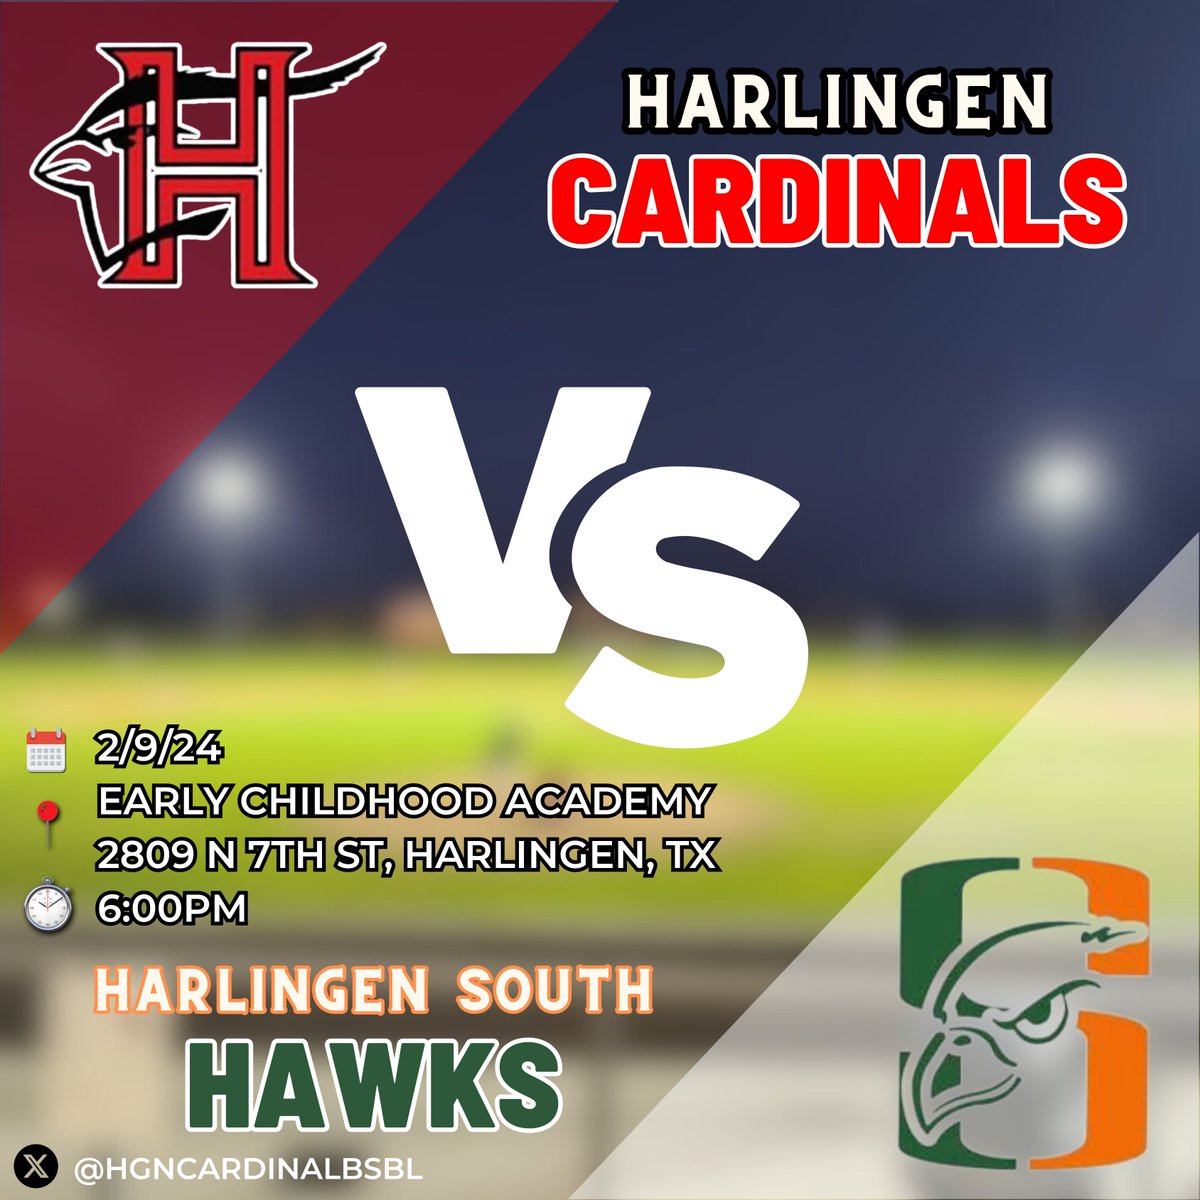 🚨 Scrimmage #3

Come out and support our boys of our great district! Should be an awesome night vs @hhssbaseball! Show up early and enjoy the atmosphere! #CSND #CardinalGrit #WINReps 

@HgnCardinalBsbl 
@HHSBaseball2024 
@HCISD_Athletics 
@HarlingenCISD